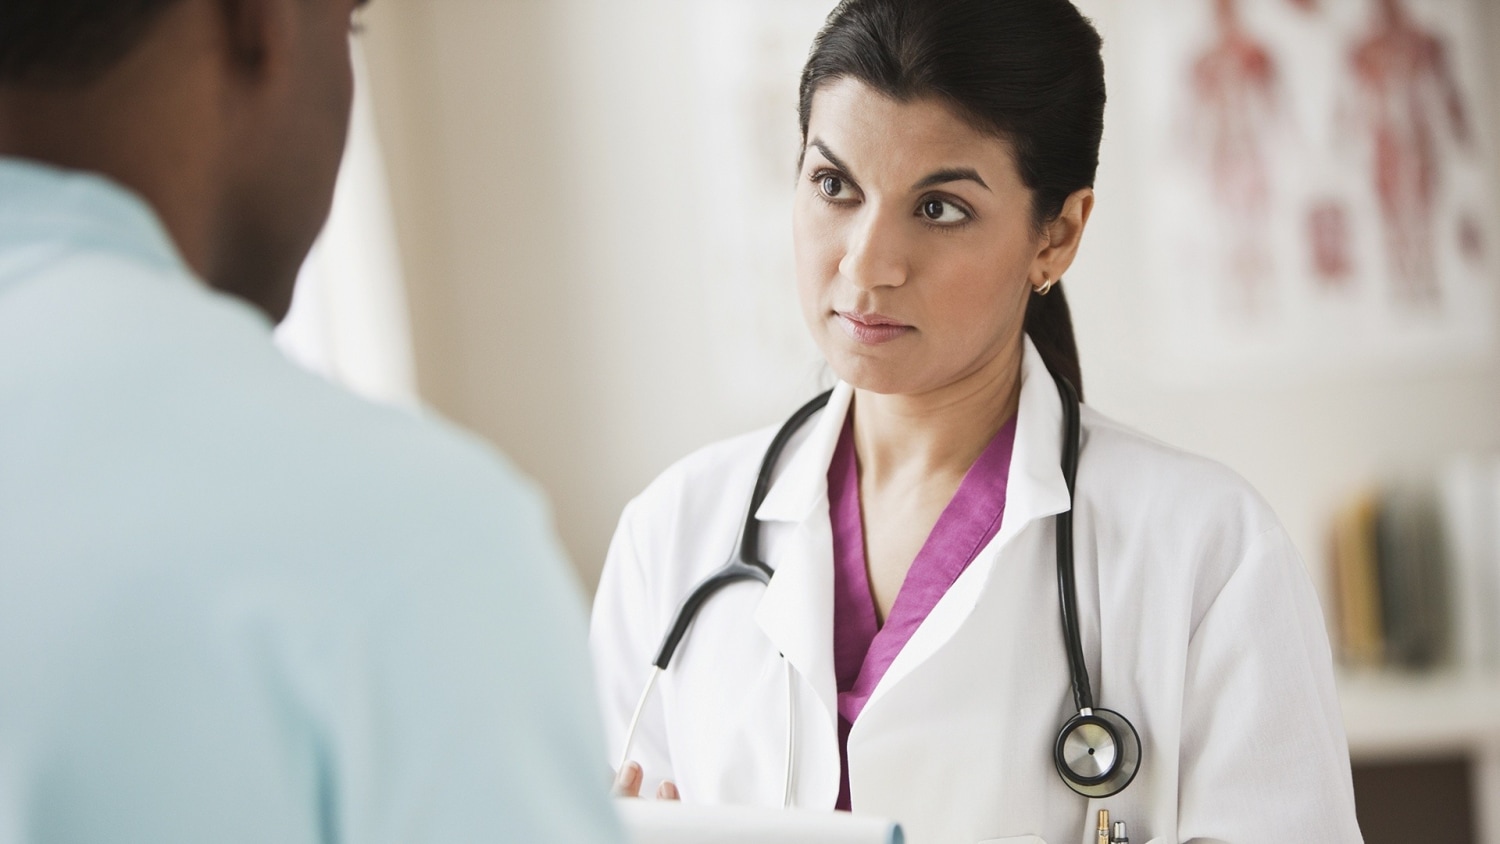 Can You Trust Your Doctor? 7 Signs They're A Good Fit — And 5 They're Not